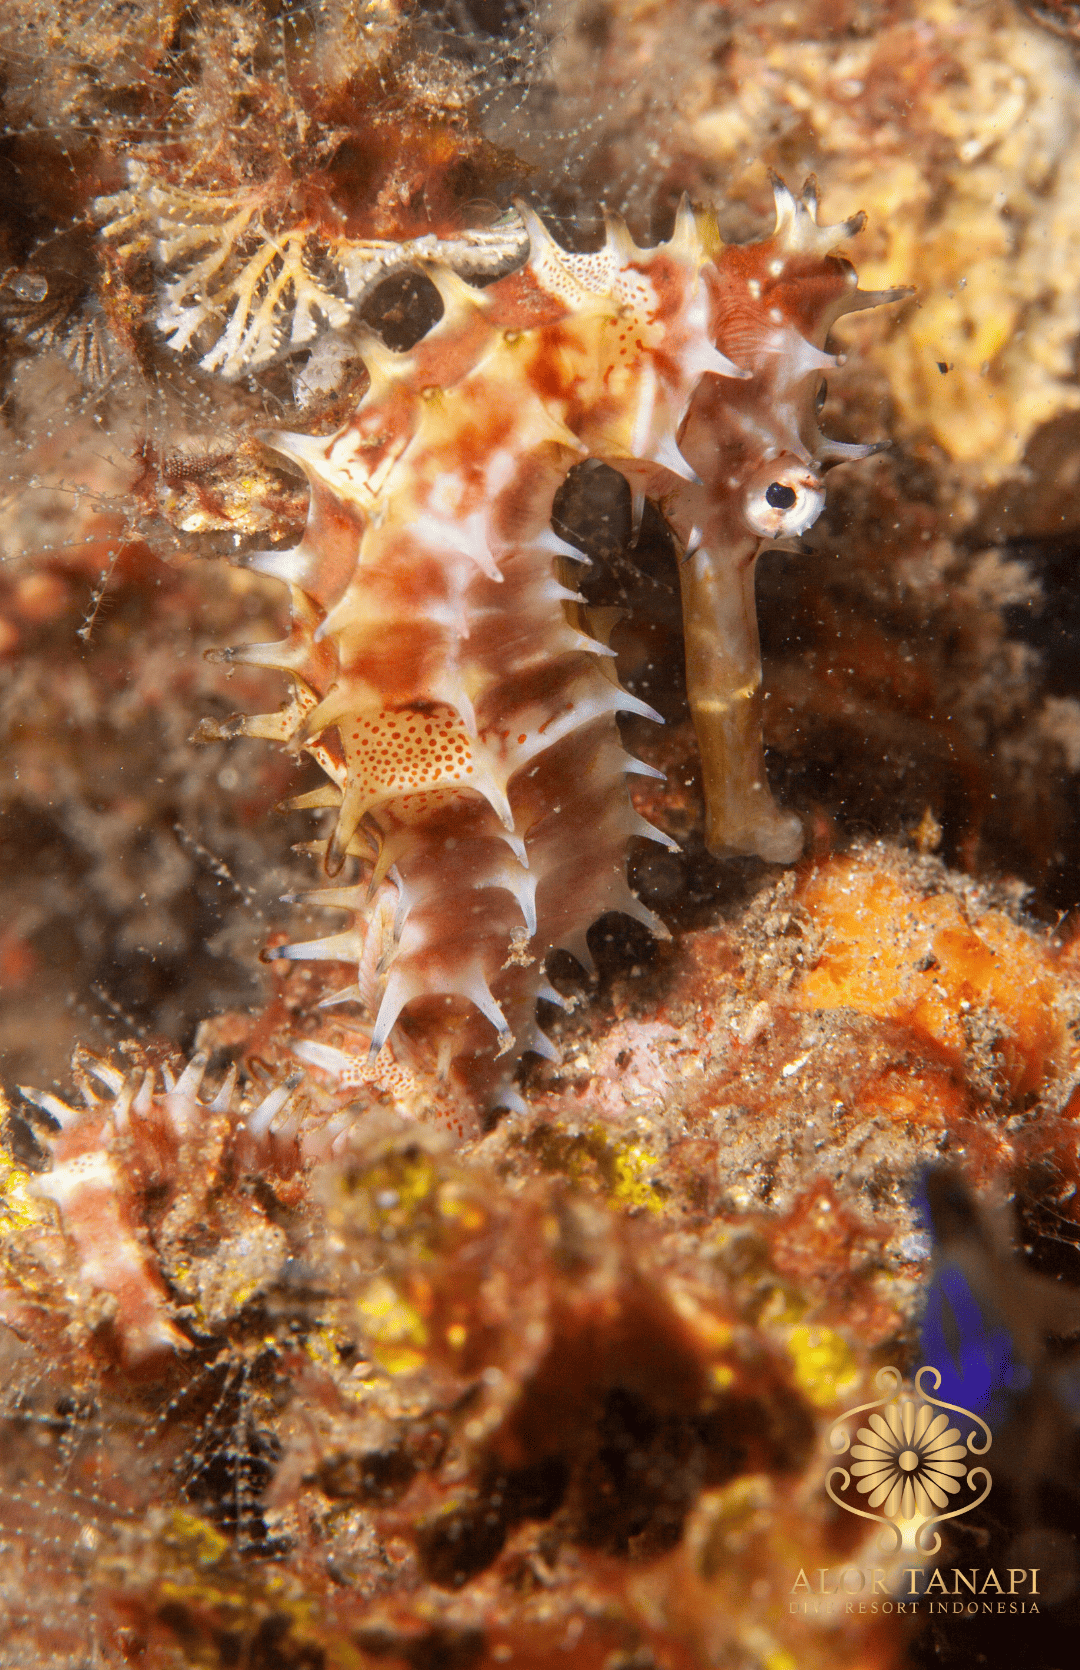 Macro diving- seahorse spotted